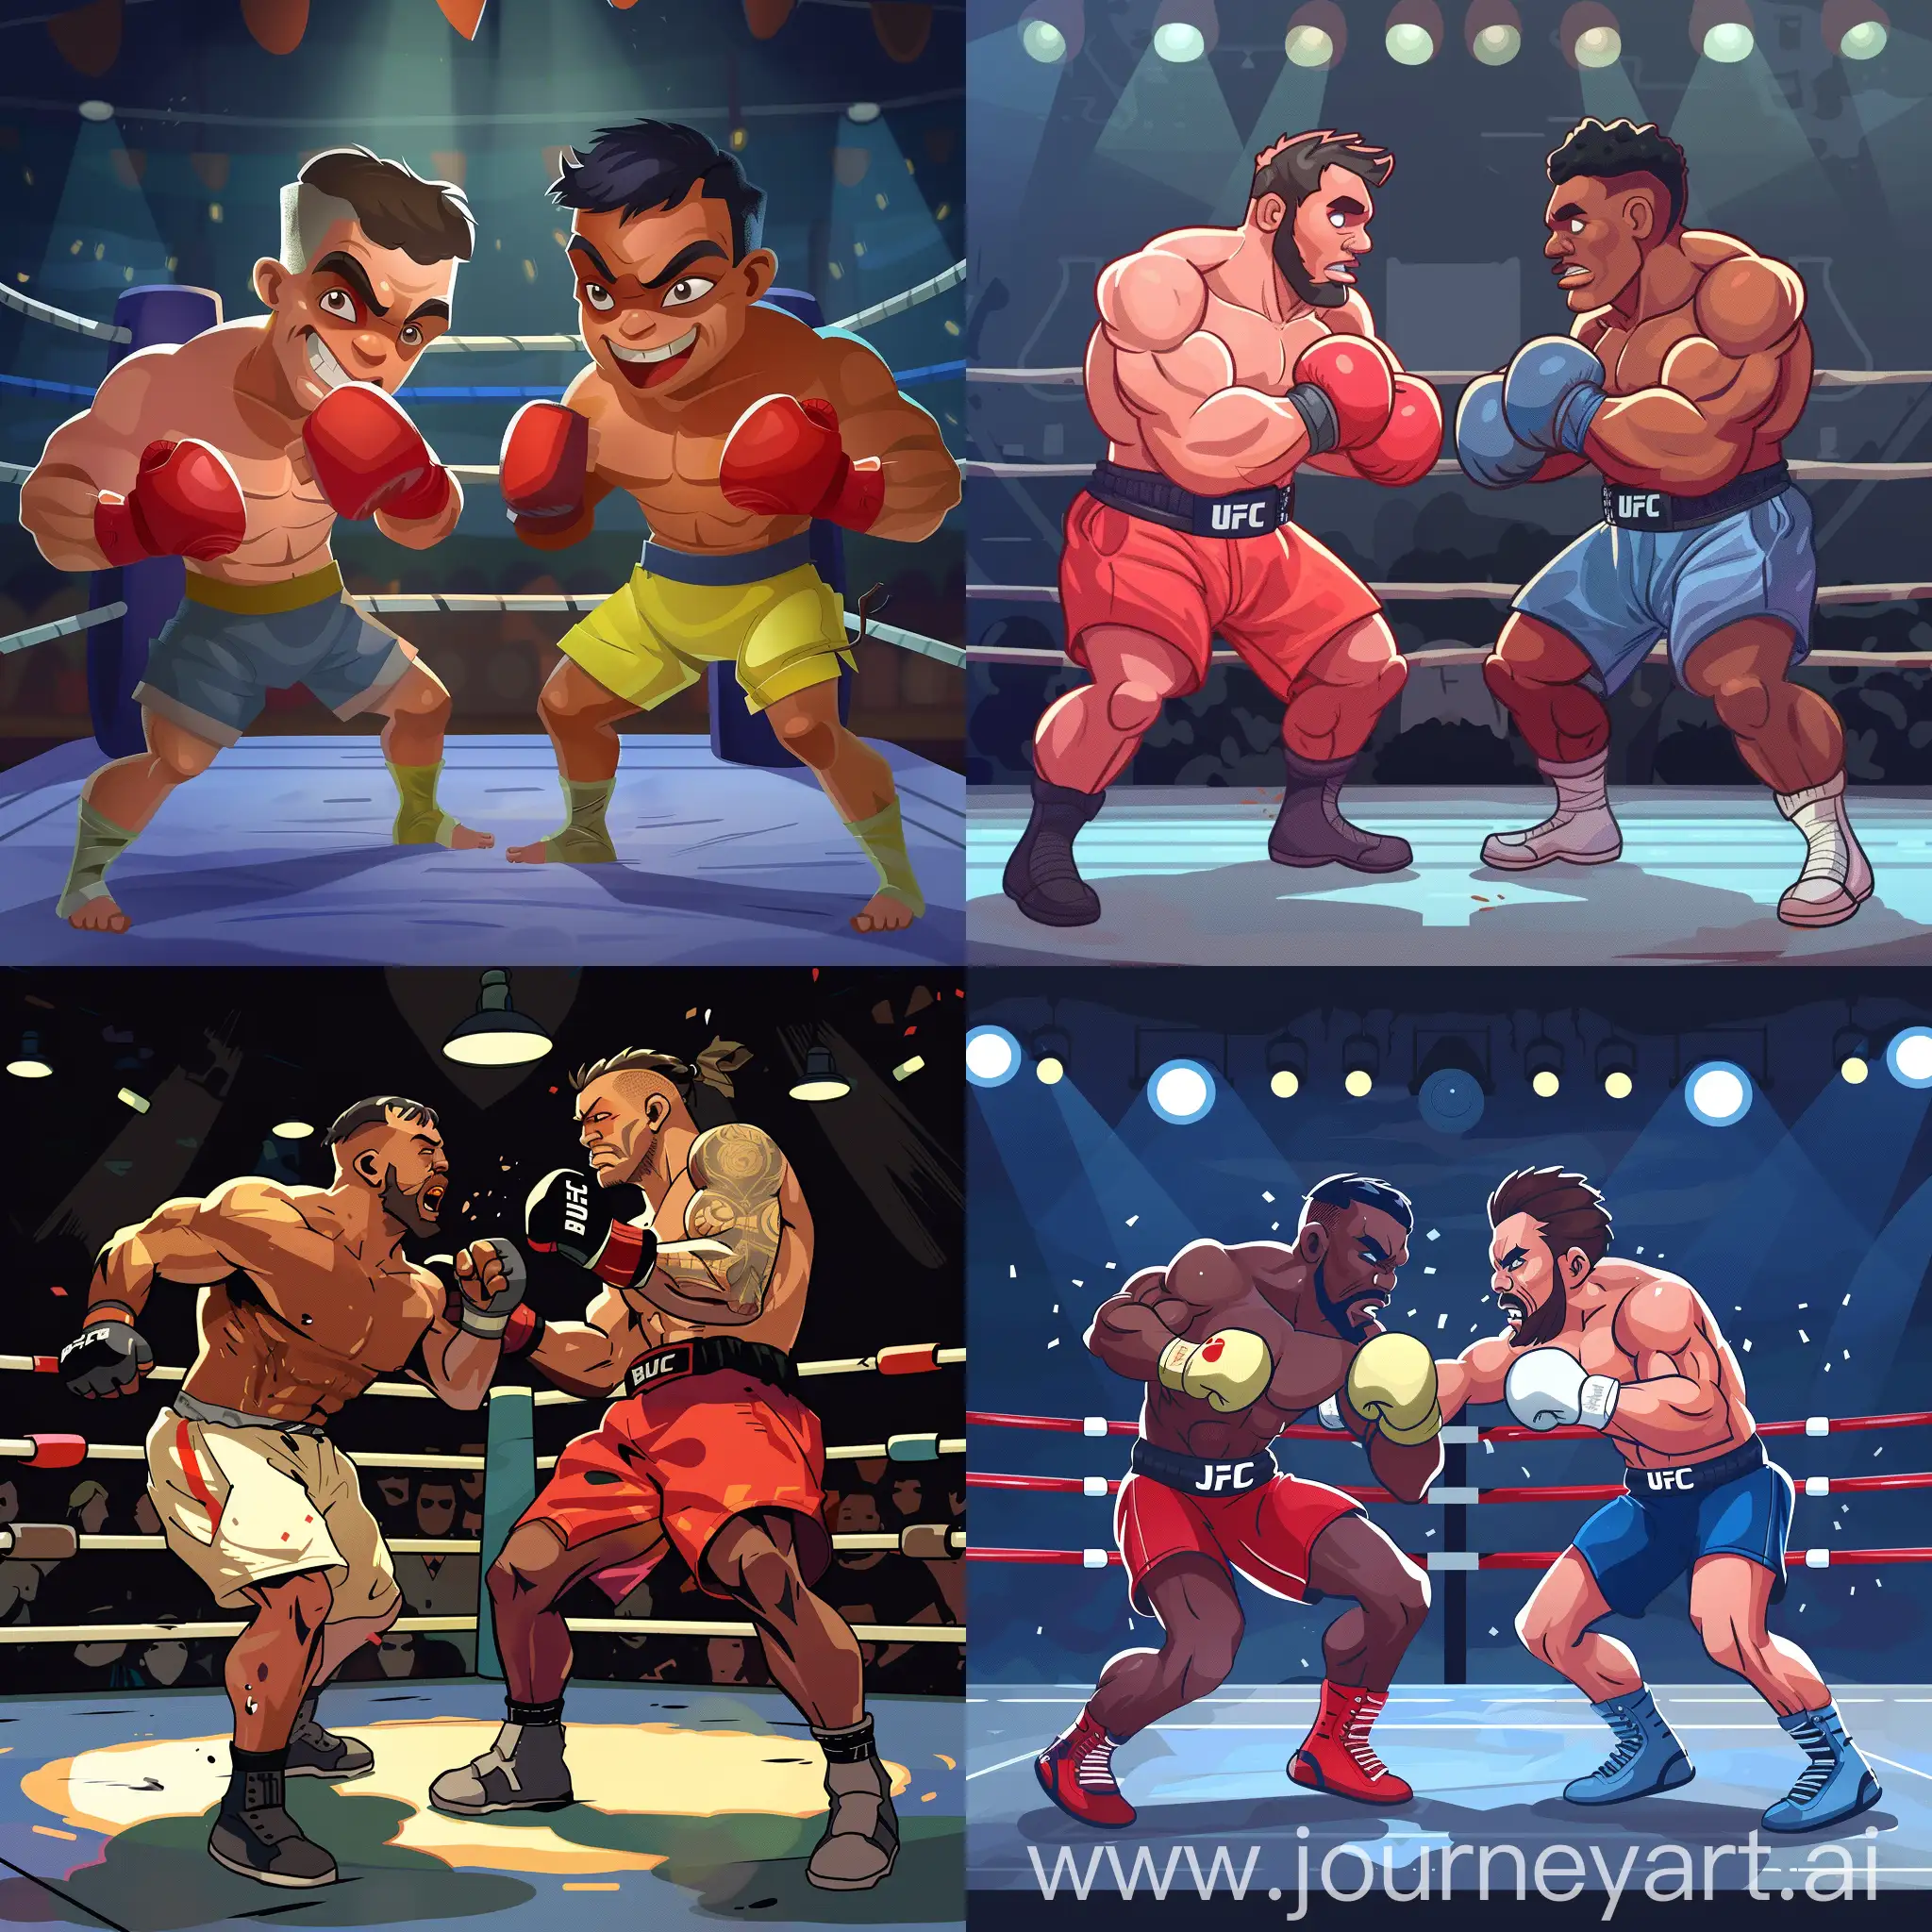 Cartoon-Style-Boxing-Match-Two-Fighters-in-the-Ring